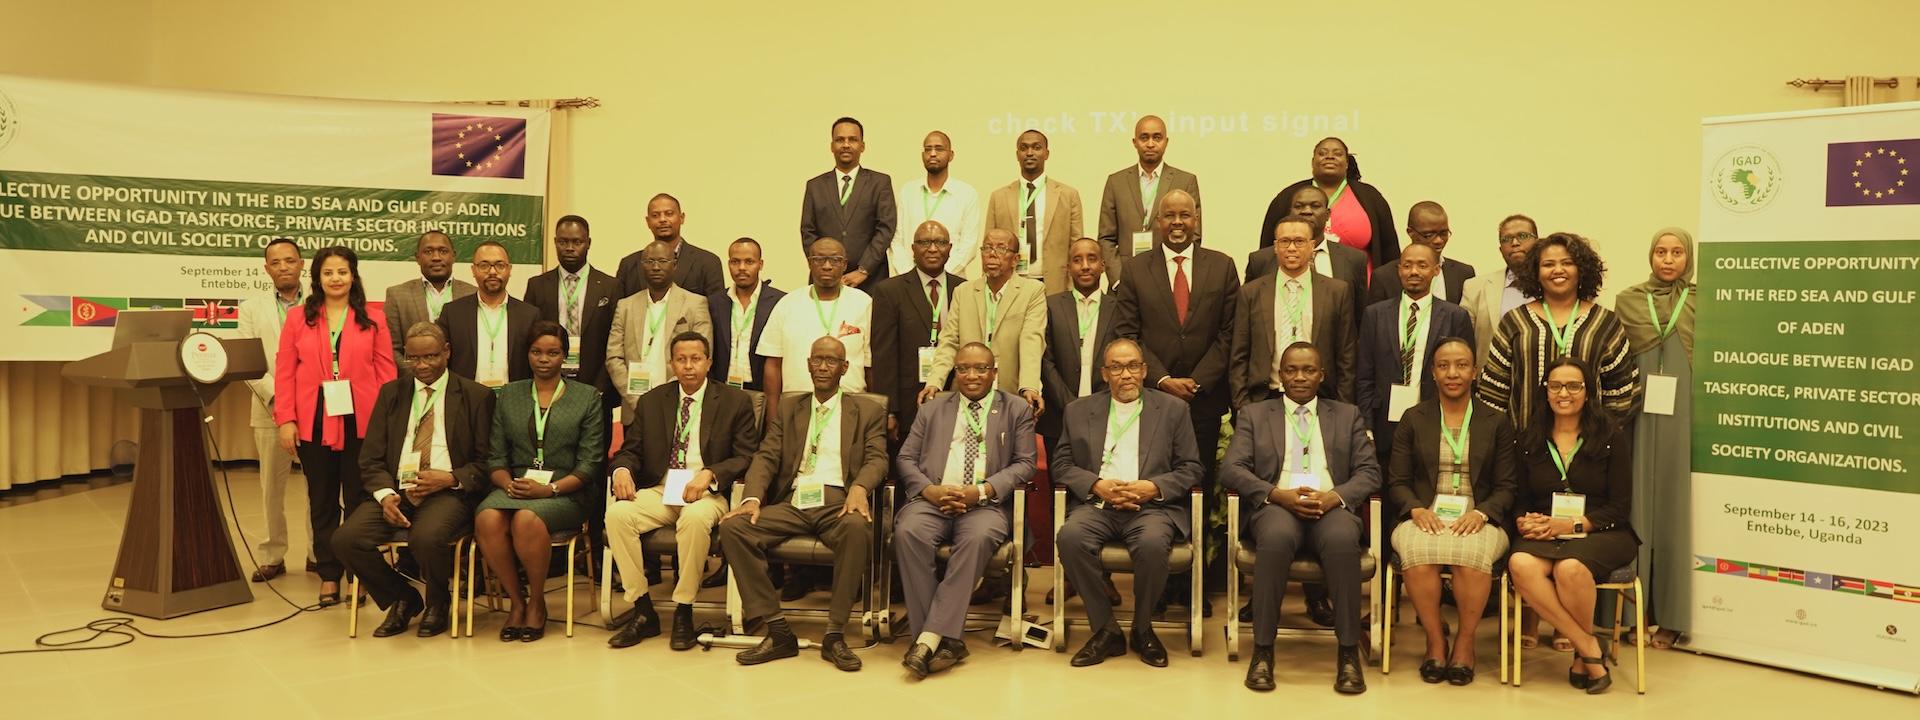 Three-Day Dialogue on Collective Opportunities in the Red Sea and Gulf of Aden between the IGAD Taskforce on the Red Sea and Gulf of Aden, Private Sector Institutions, and Civil Society Organisations concludes with actionable recommendations